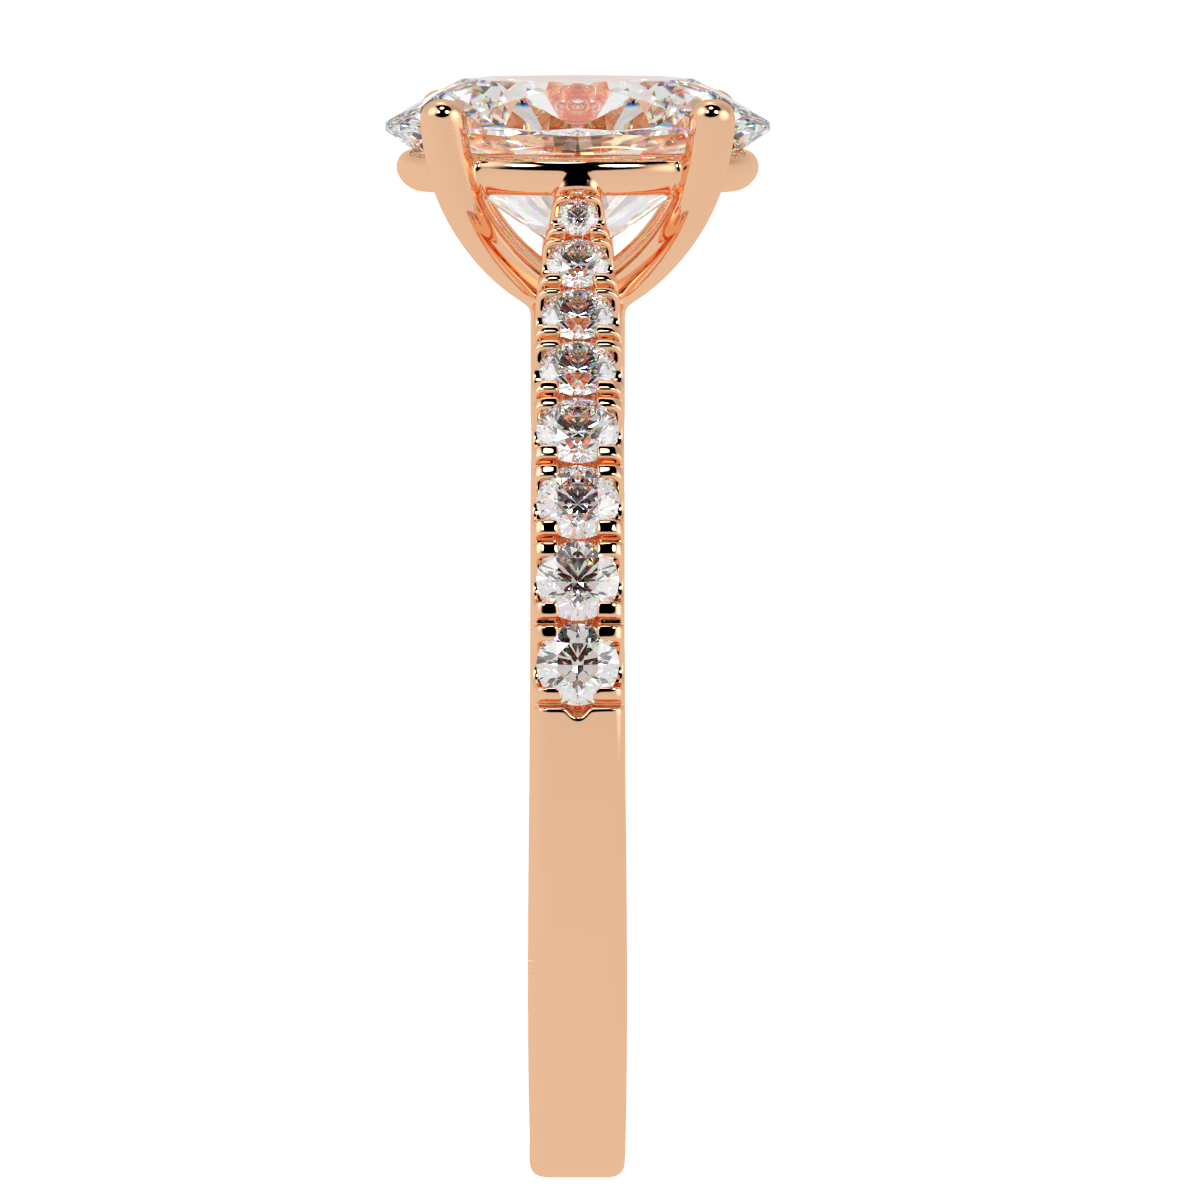 Classic Oval Diamond Shoulder Ring